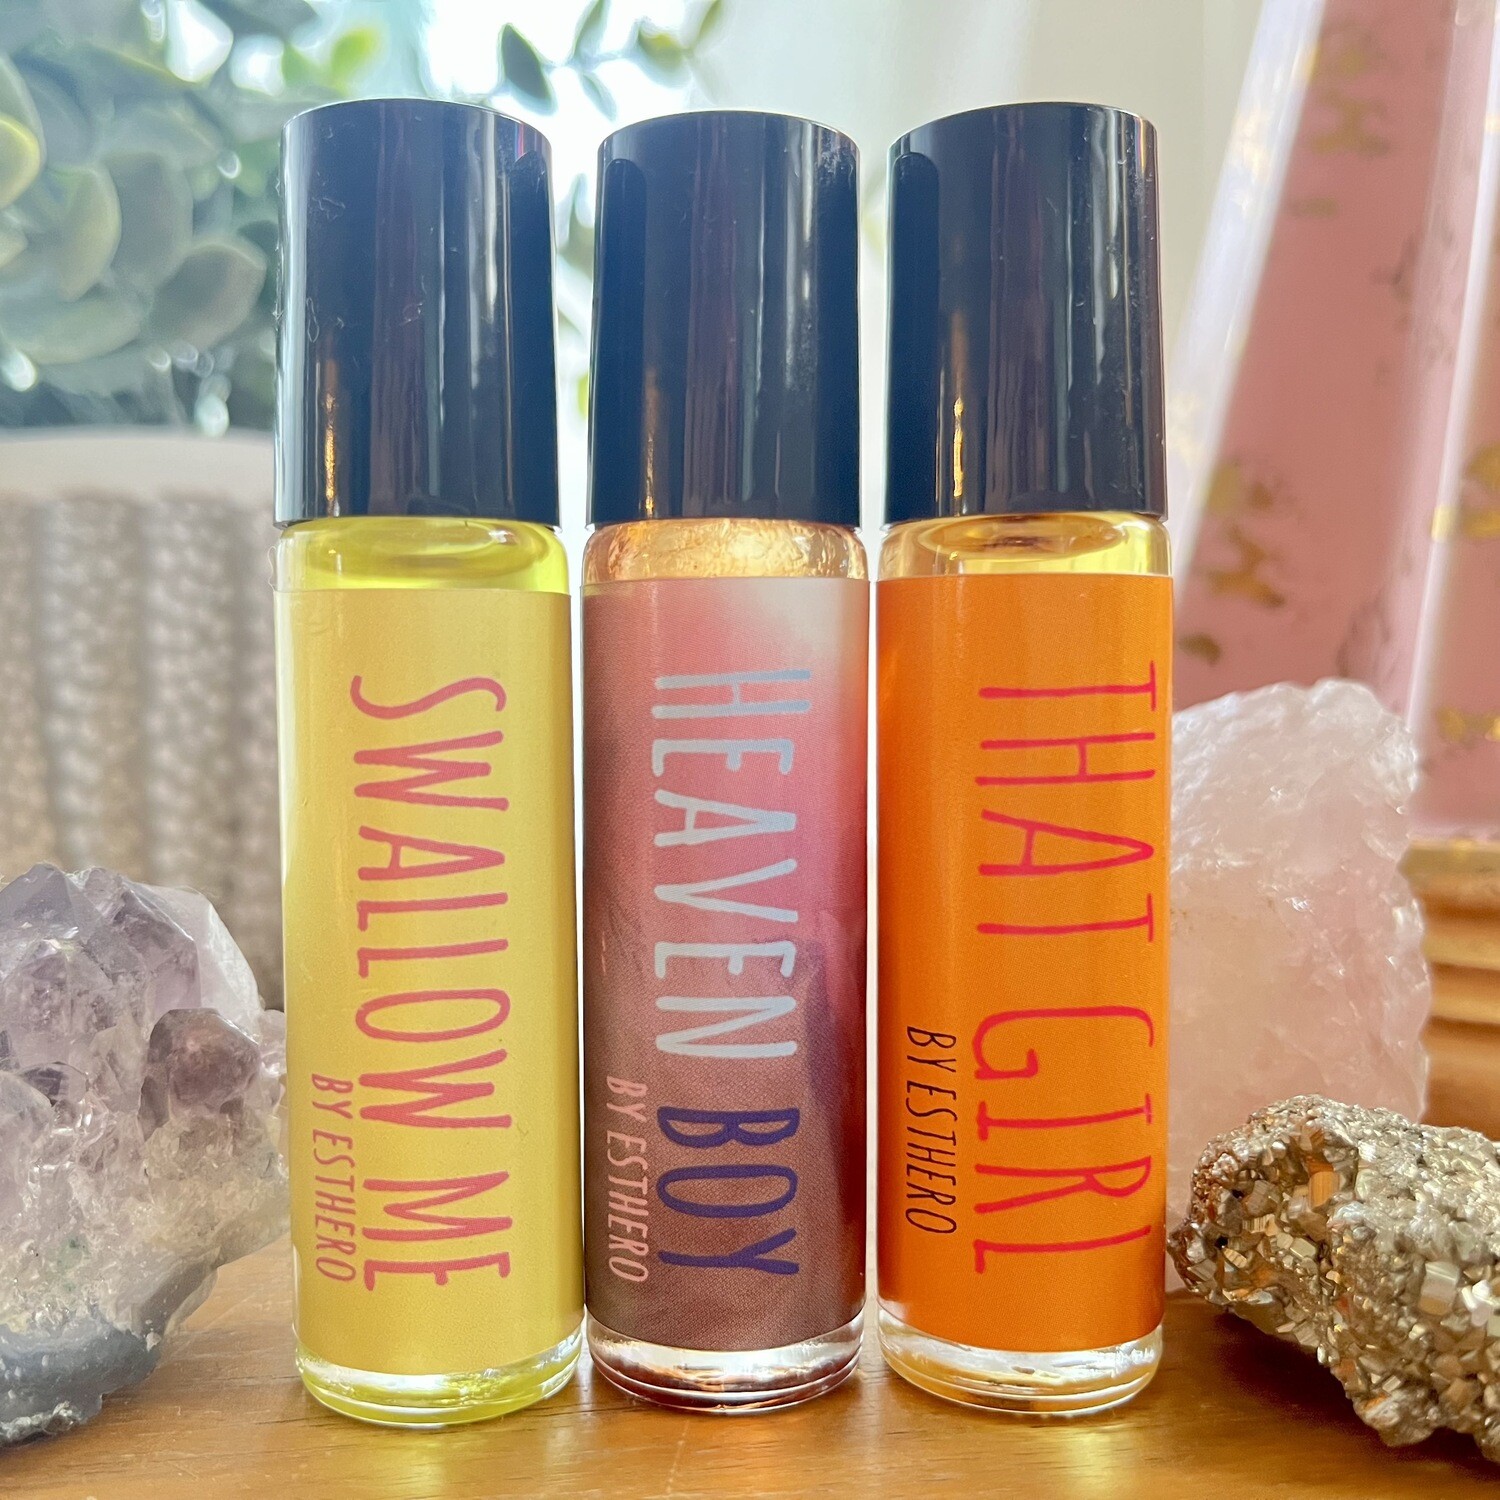 3 for $33 -Bundle of 3 Roll on 10ml Perfume Oils (You Choose Scents)